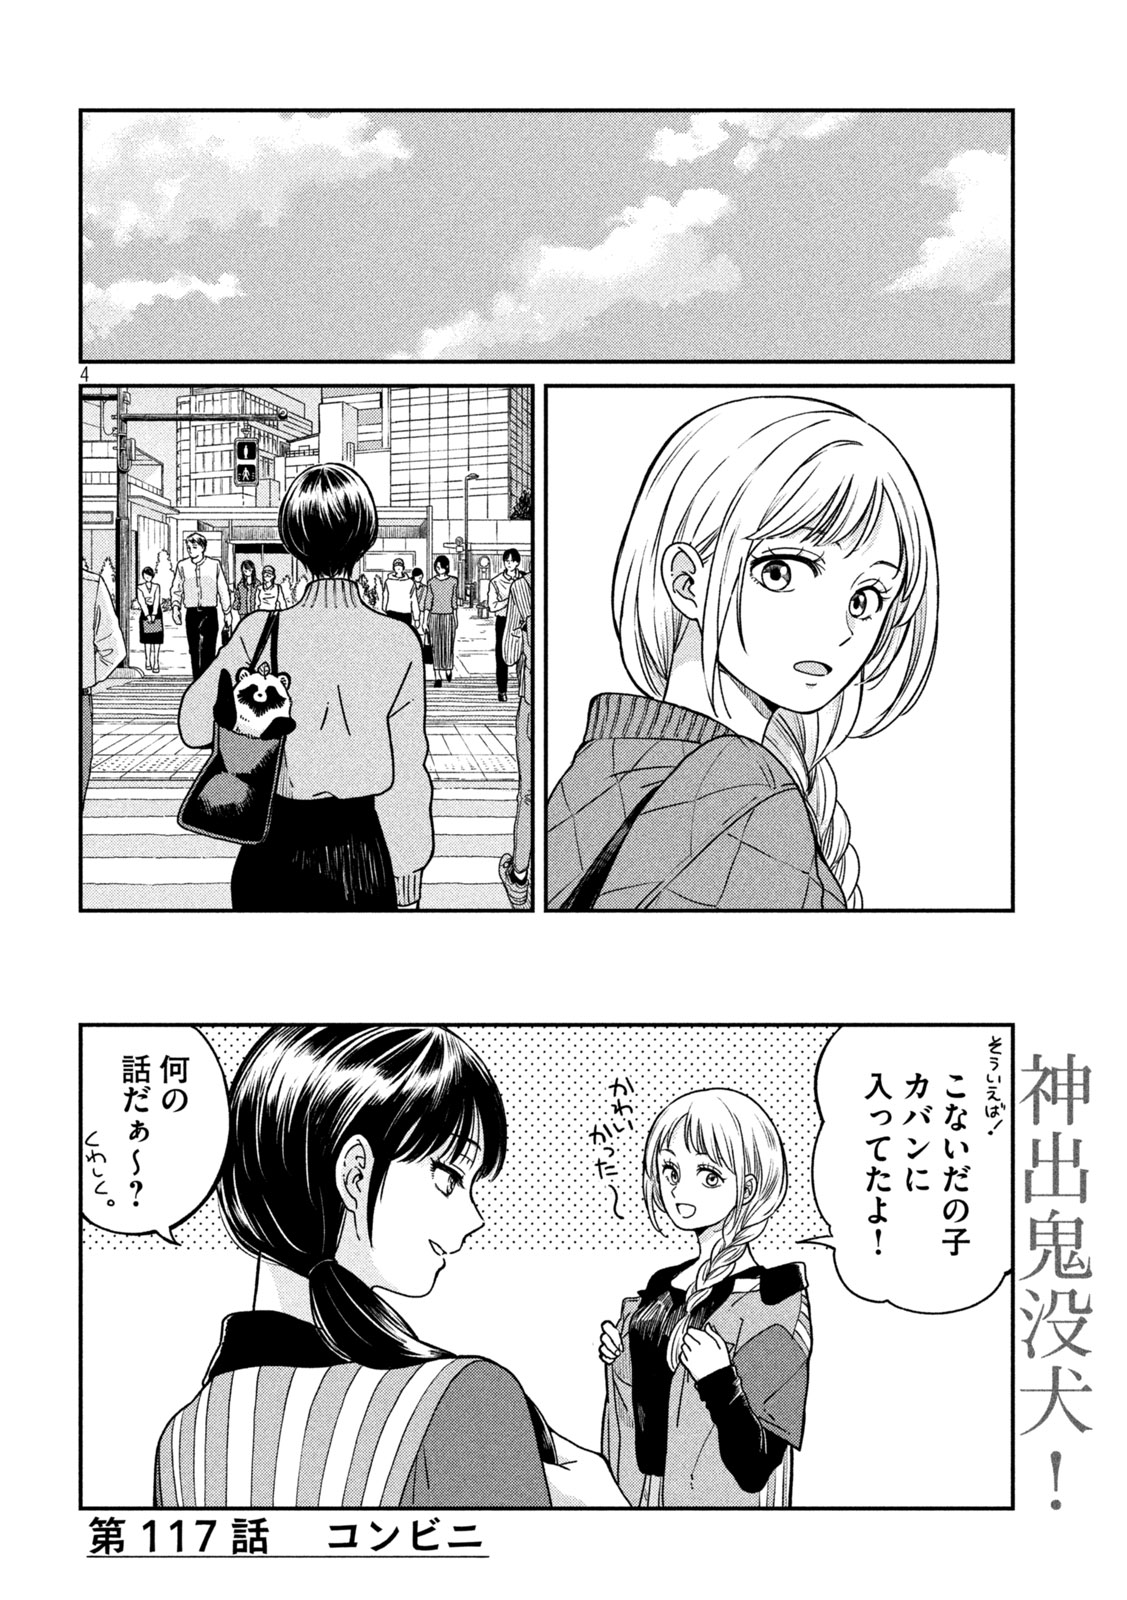 Ame to Kimi to - Chapter 117 - Page 4